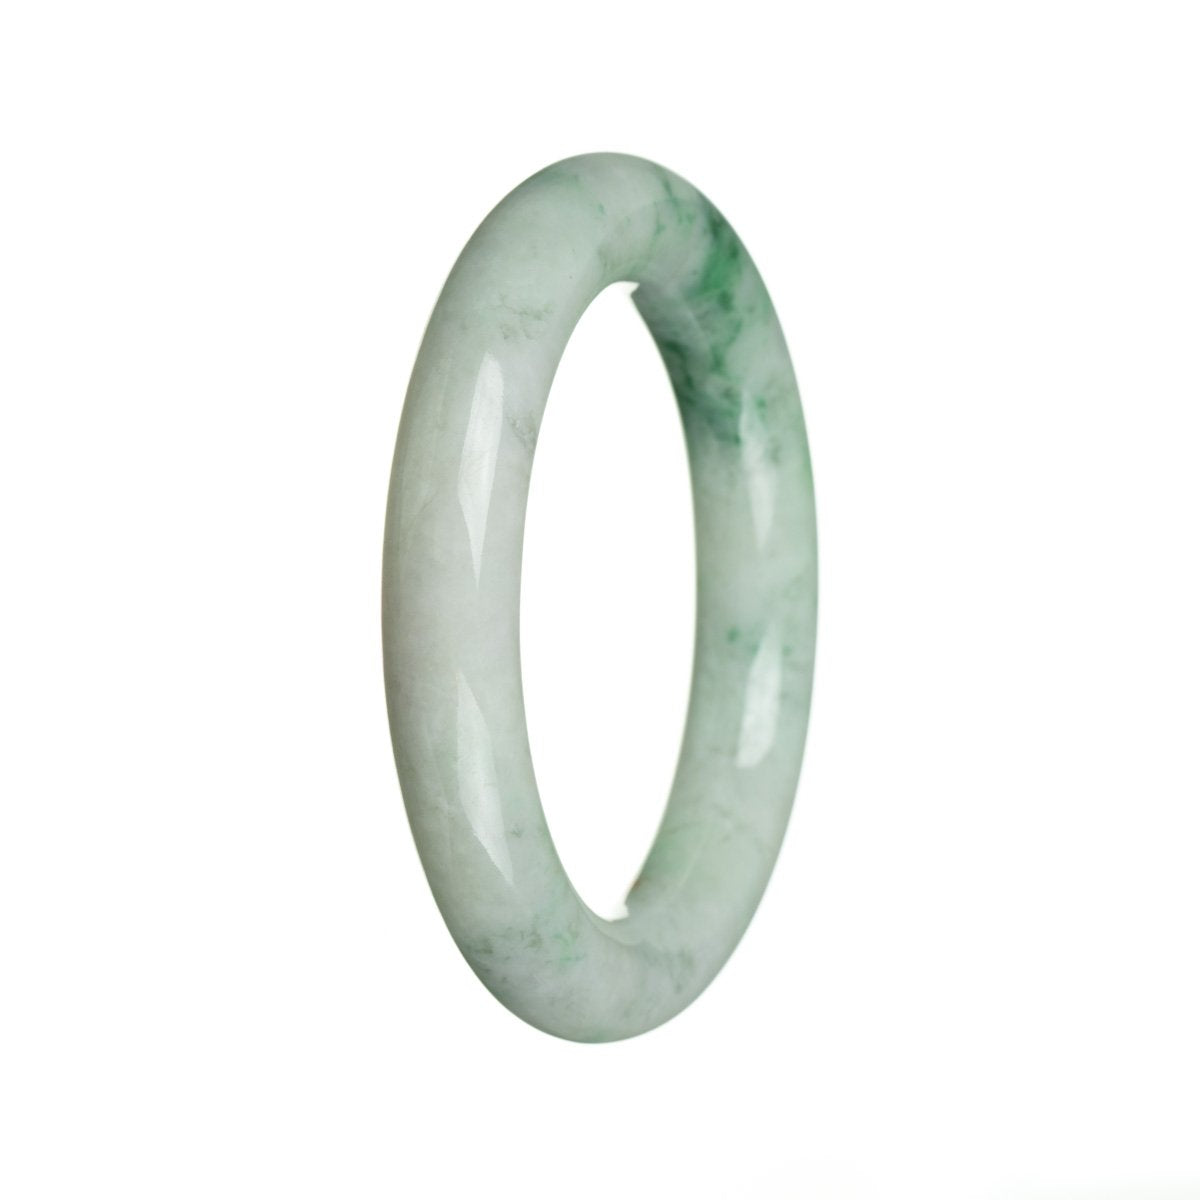 A close-up image of a round jade bracelet, showcasing its natural white color with a green flower design. The bracelet is traditional in style and measures 56mm in diameter. Crafted by MAYS GEMS.